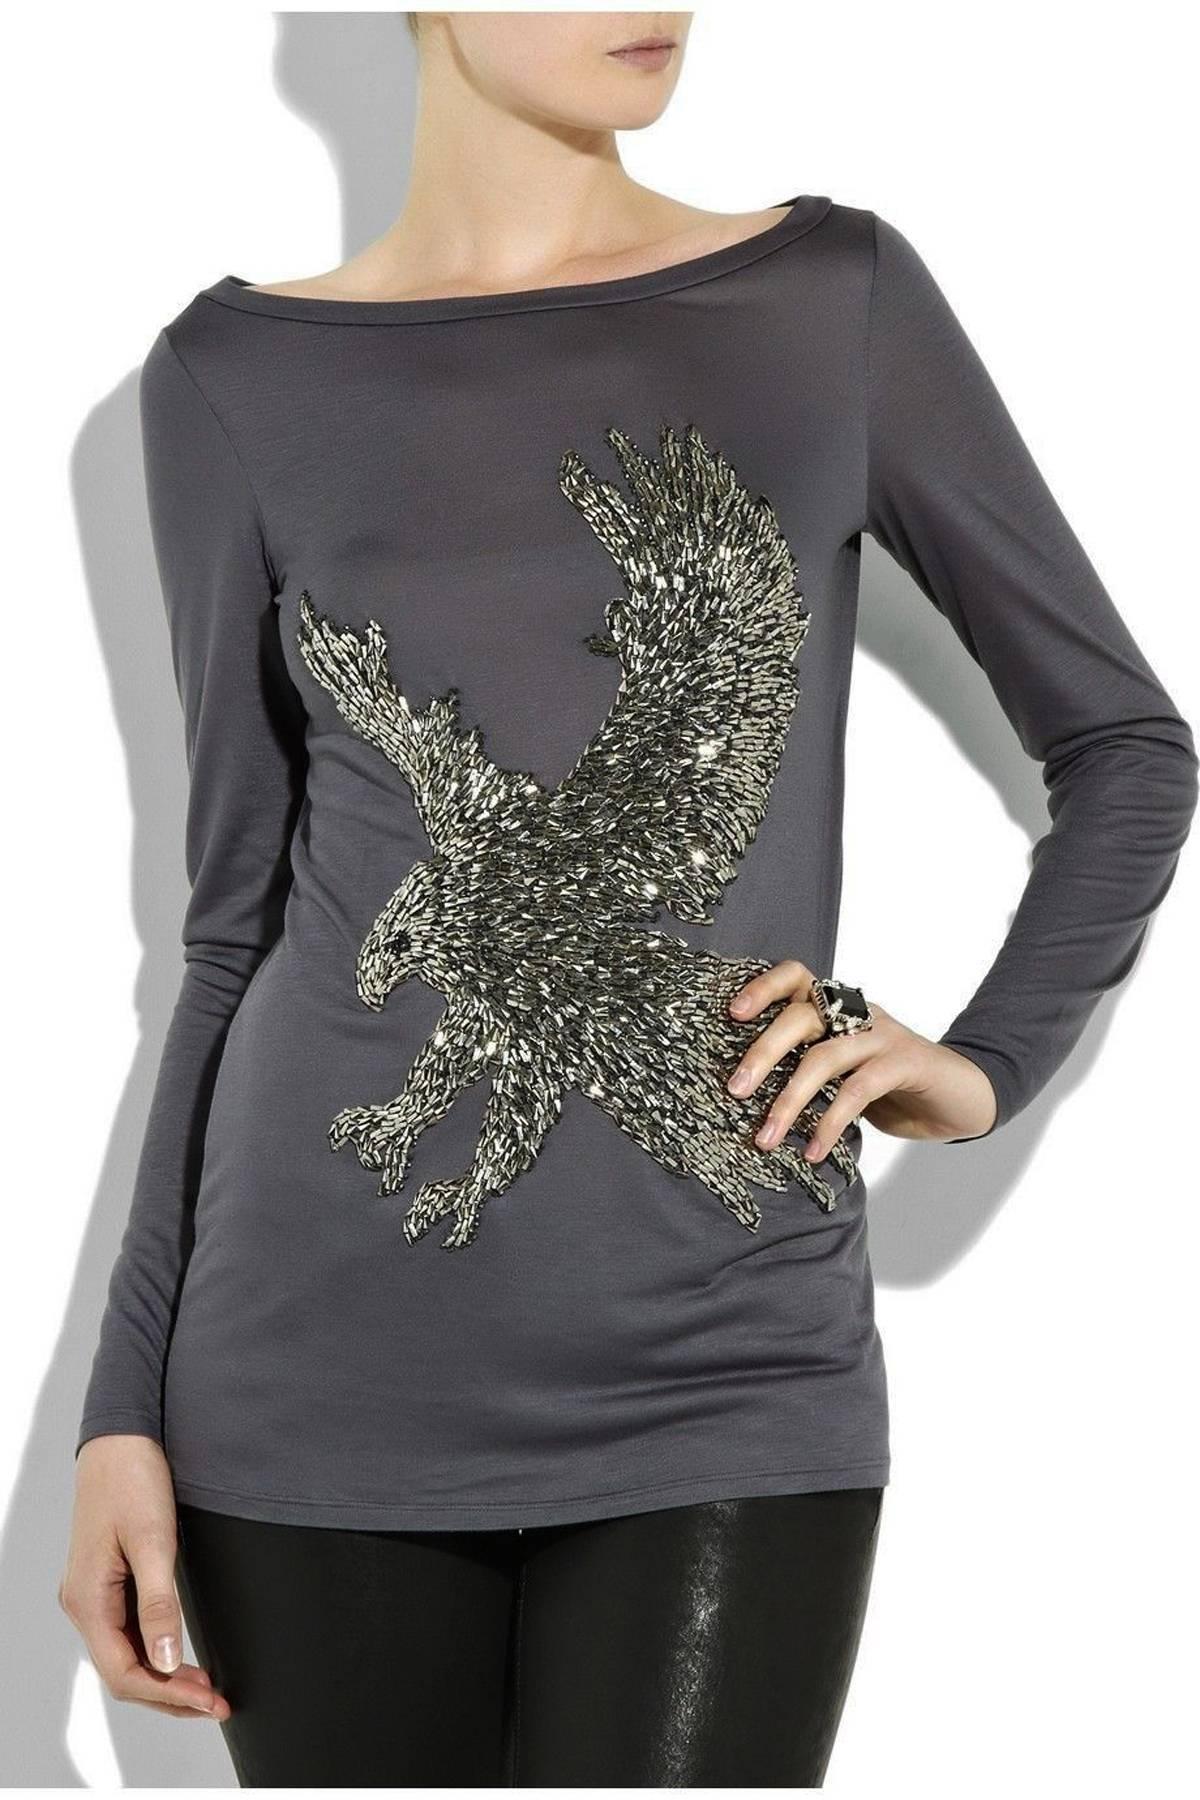 New EMILIO PUCCI Exclusively Hand Beaded Eagle Top
Italian Size 38 – US 4
Color – Gray
100% Soft Viscose
Eagle-Shaped Gunmetal-Tone Beaded Motif at Front
Scoop Neck, Long Sleeve
Simple Slips On
Measurements: Length – 27 inches, Sleeve – 25”, Bust –